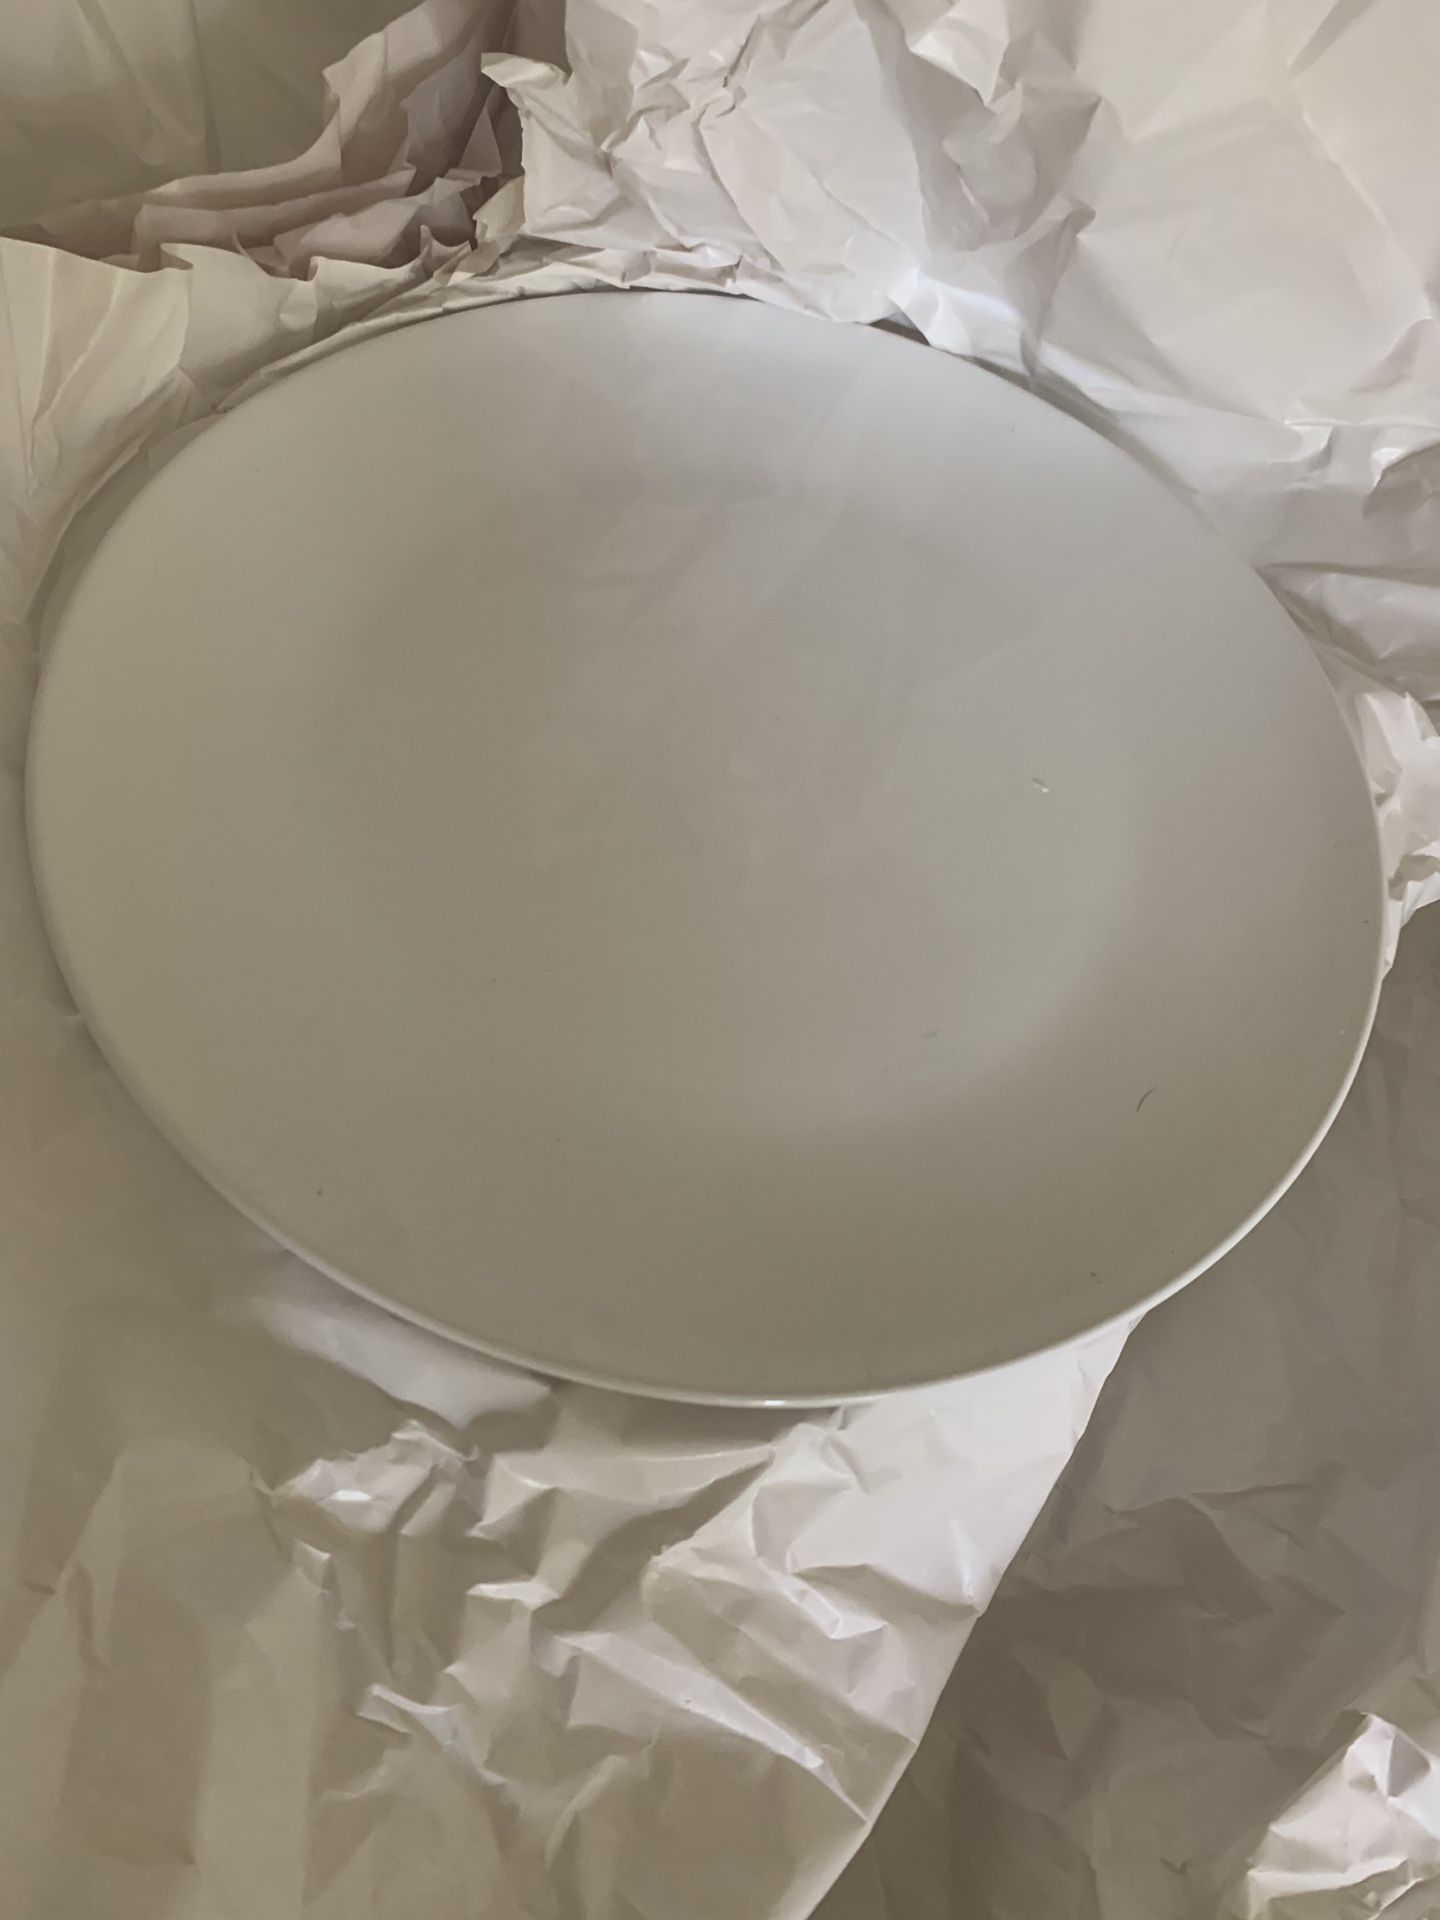 Newly Used all white dishes